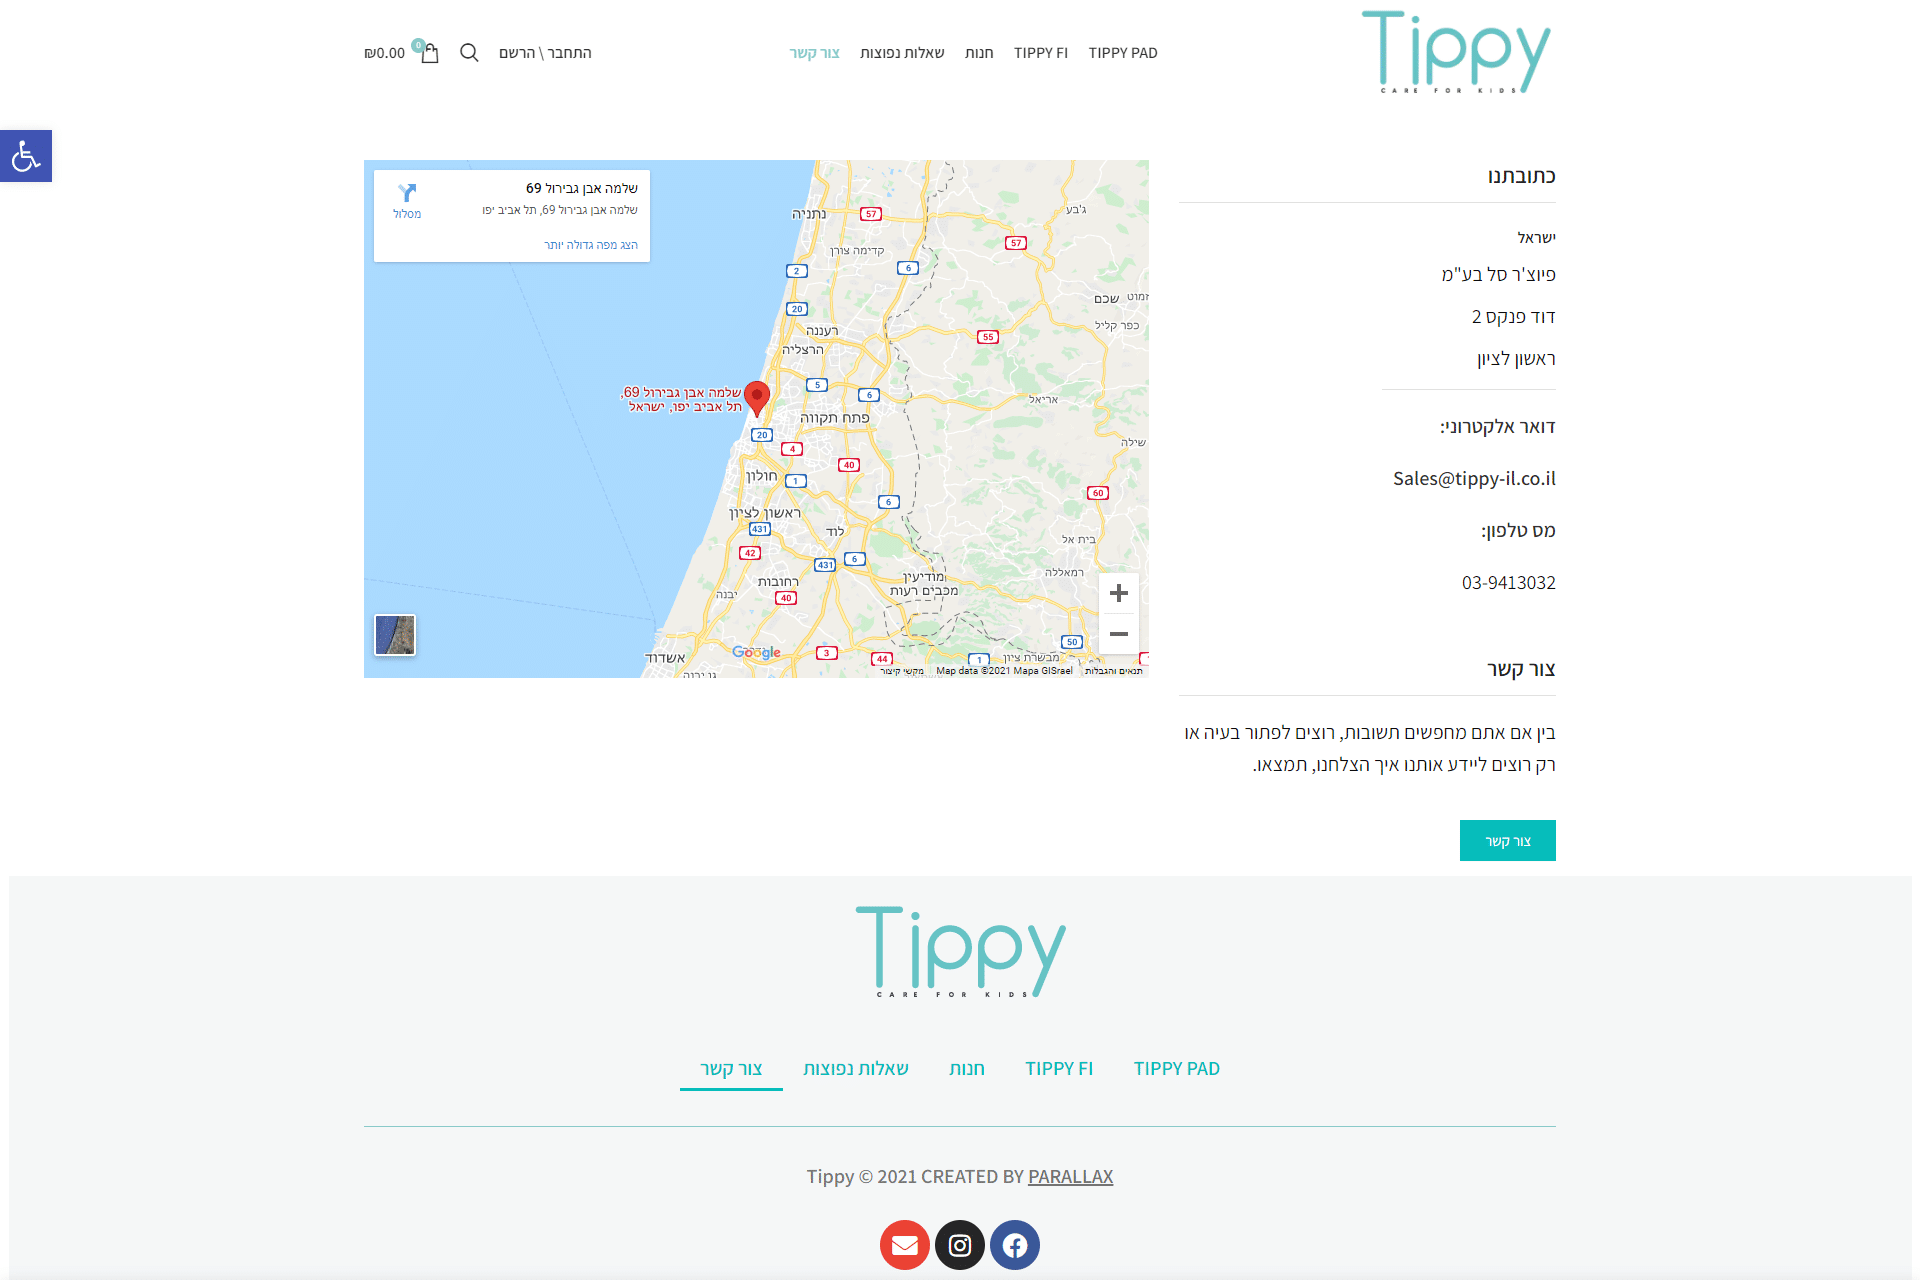 FireShot Capture 720 - צור קשר - Tippy Israel - tippy-il.co.il